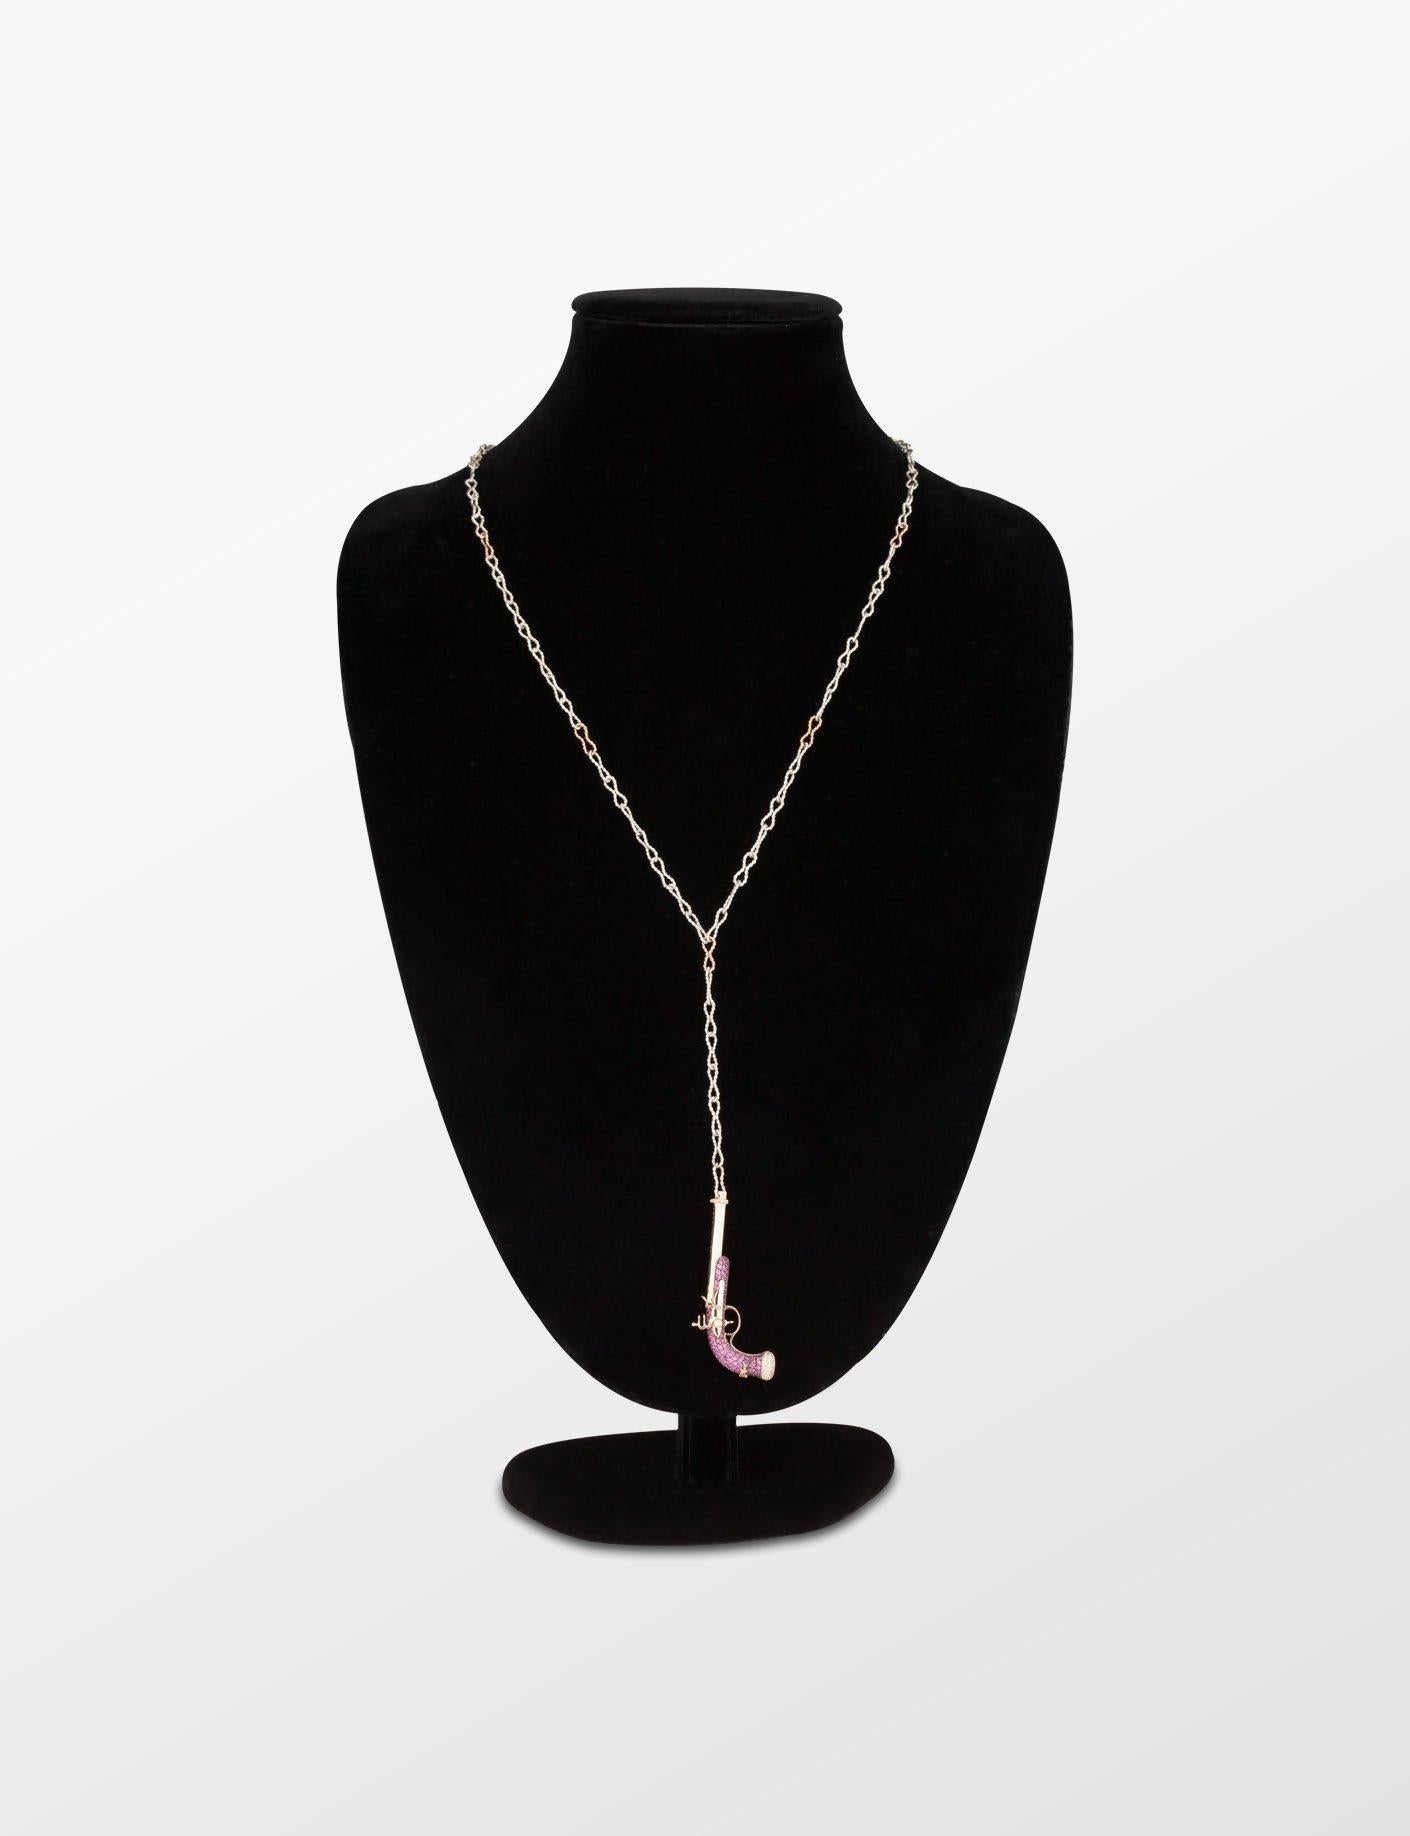 Handmade 18kt Rose Gold ,925 Sterling Silver,0.43 ct  Near Colorless Diamonds,1.78 ct Pink Sapphire